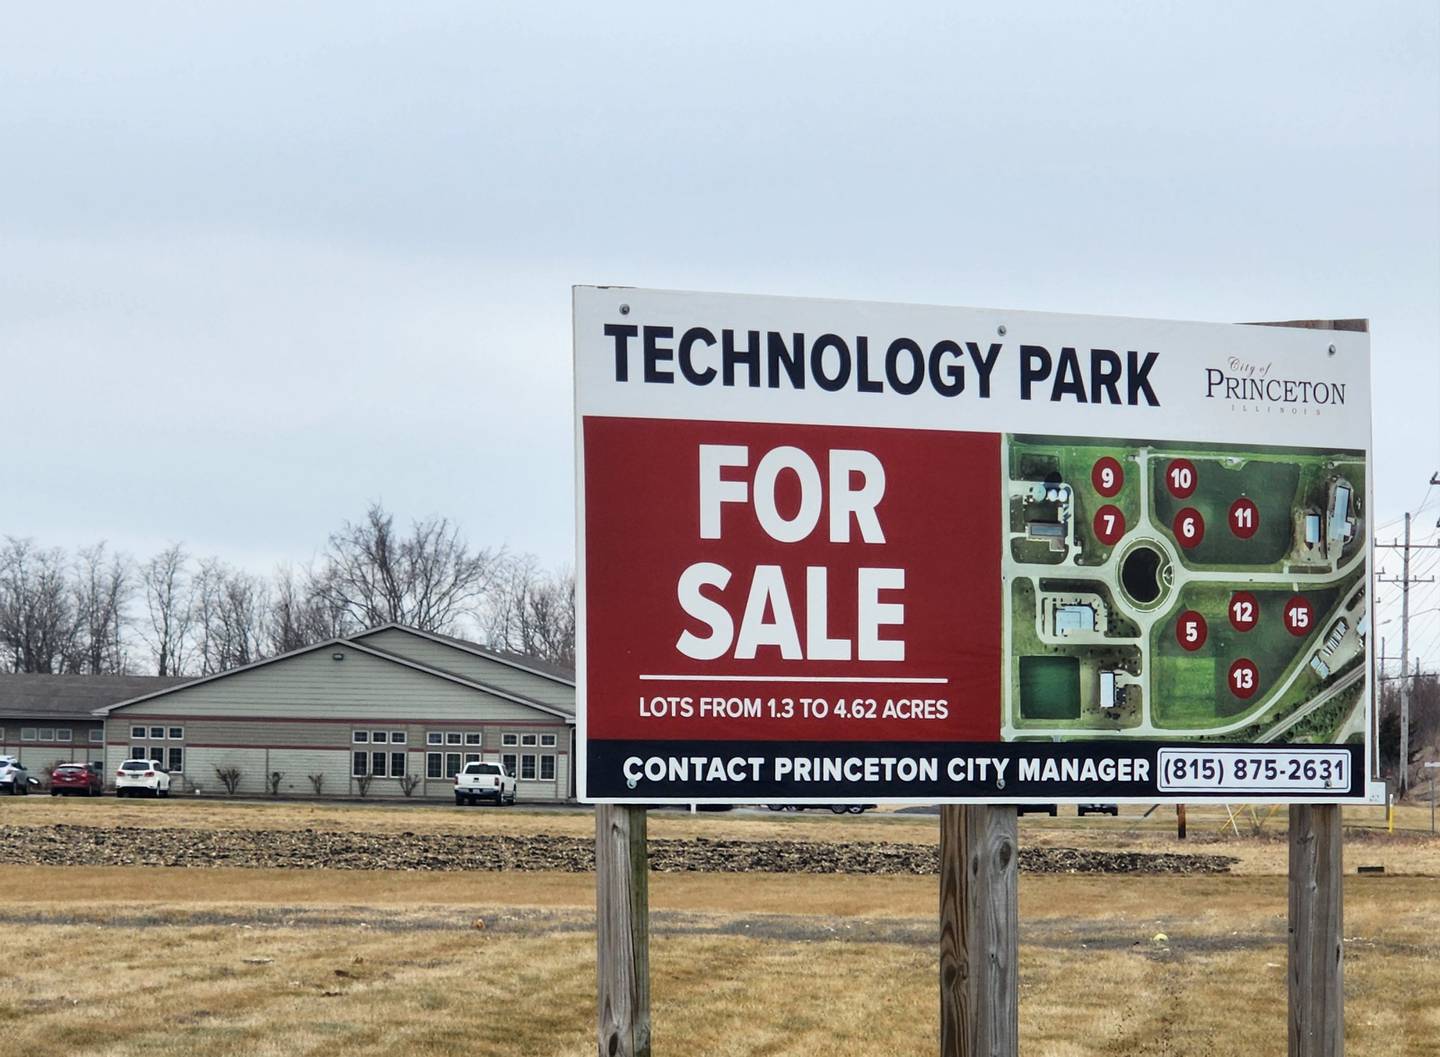 During Tuesday’s meeting, representatives from neighboring properties and business owners spoke about their concerns with the project including its location and overall look of the tech park.